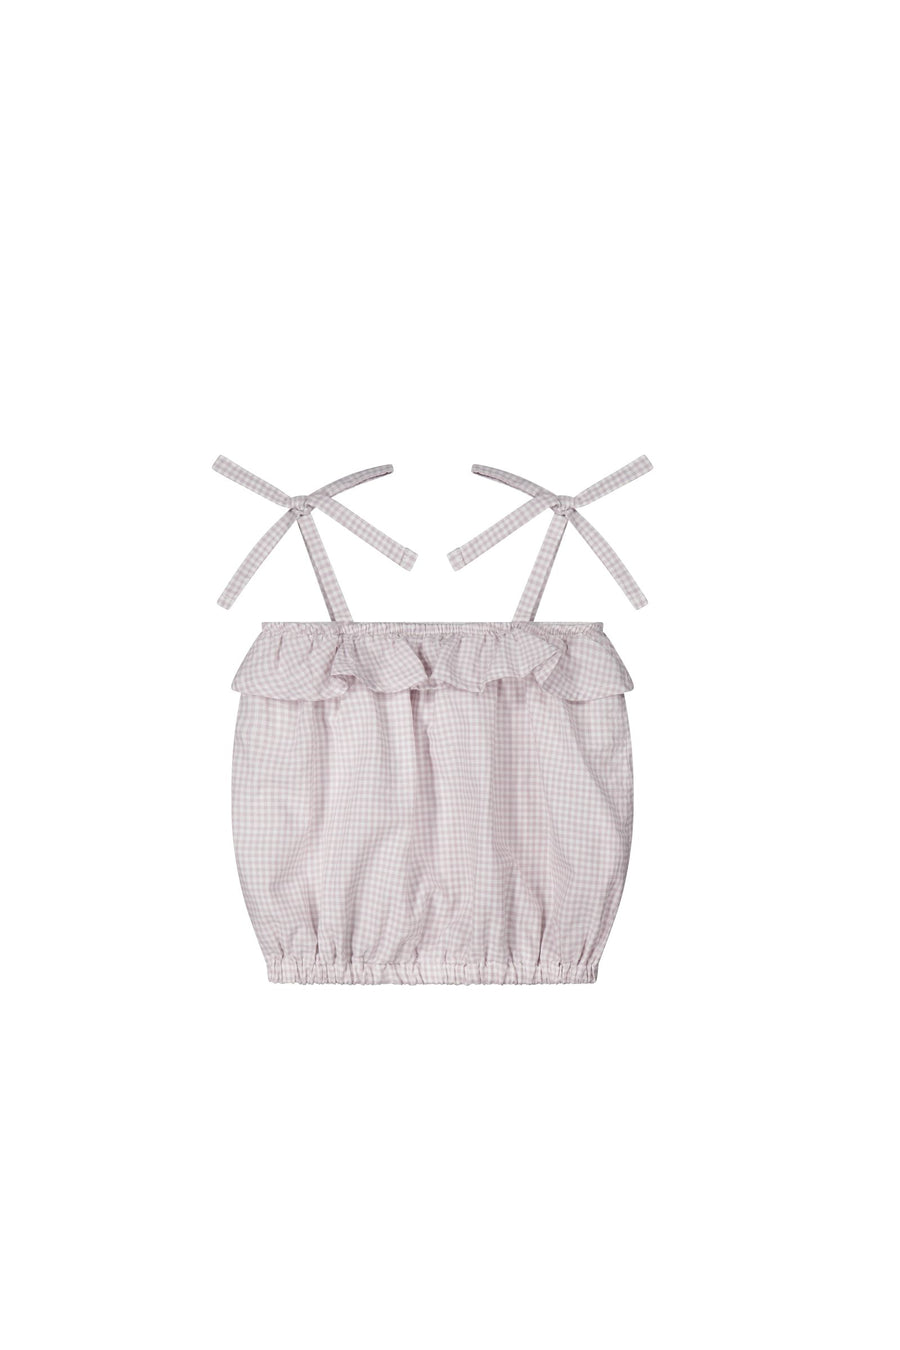 Organic Cotton Angelina Top - Gingham Lilac Childrens Top from Jamie Kay NZ